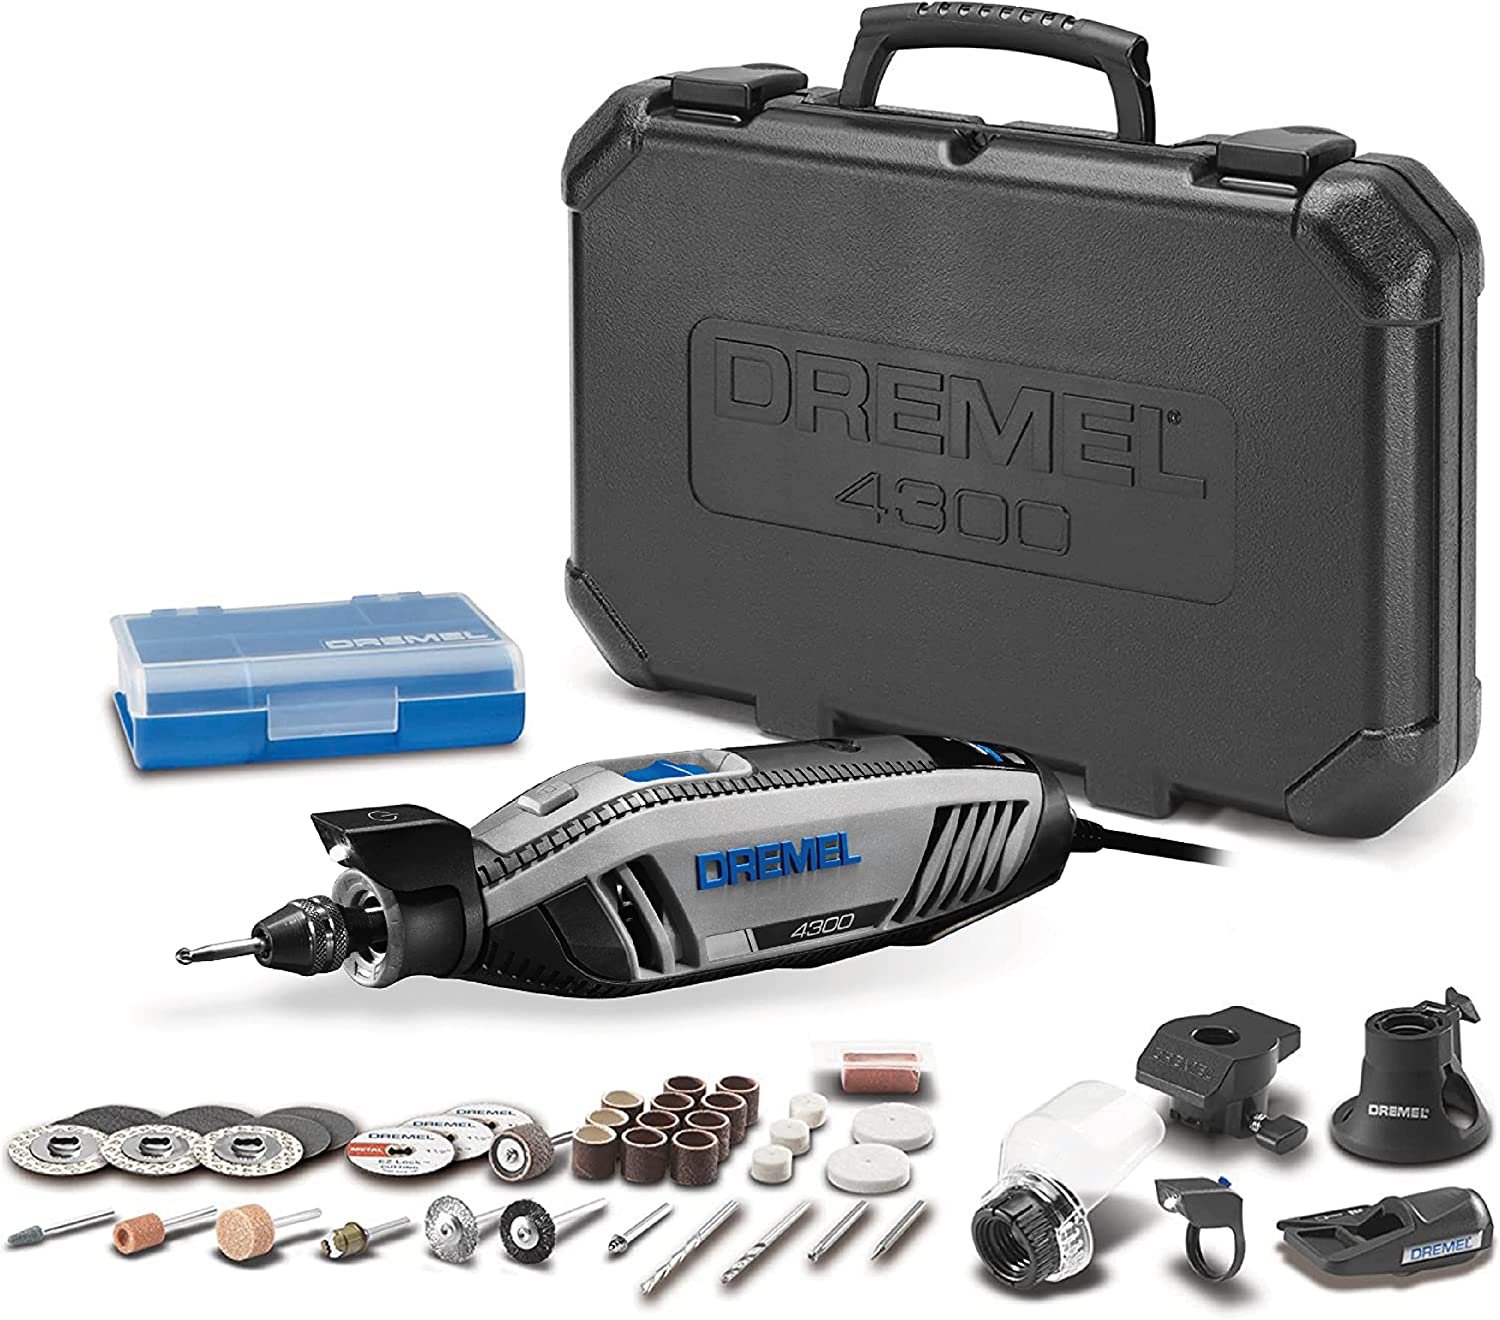 Dremel 4300-5/40 High Performance Rotary Tool Kit with LED Light- 5 Attachments & 40 Accessories- $99.99